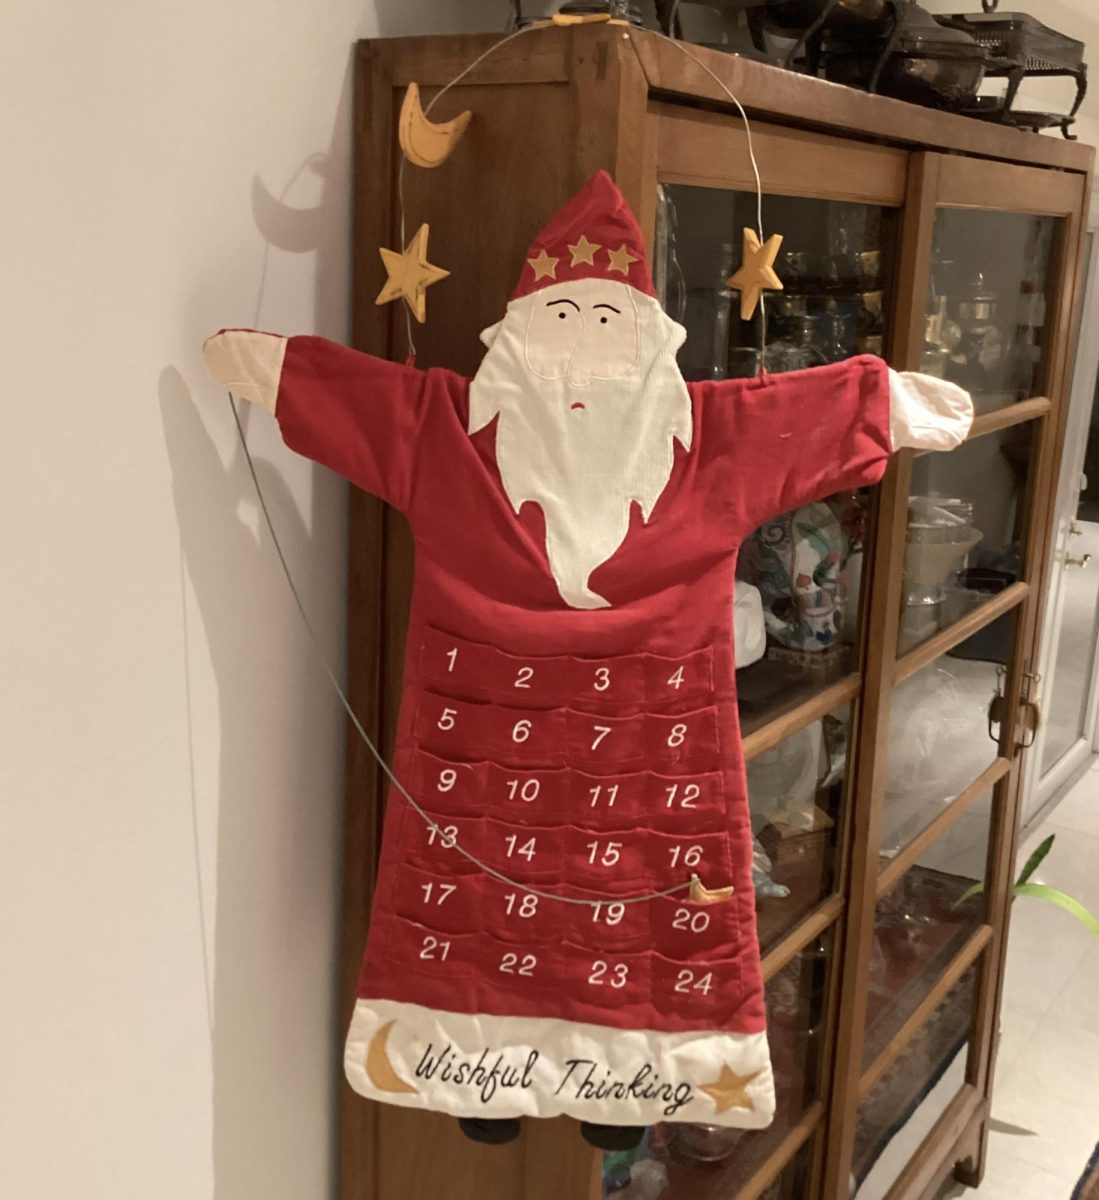 This Advent calendar Santa wears the iconic red robe and hat.